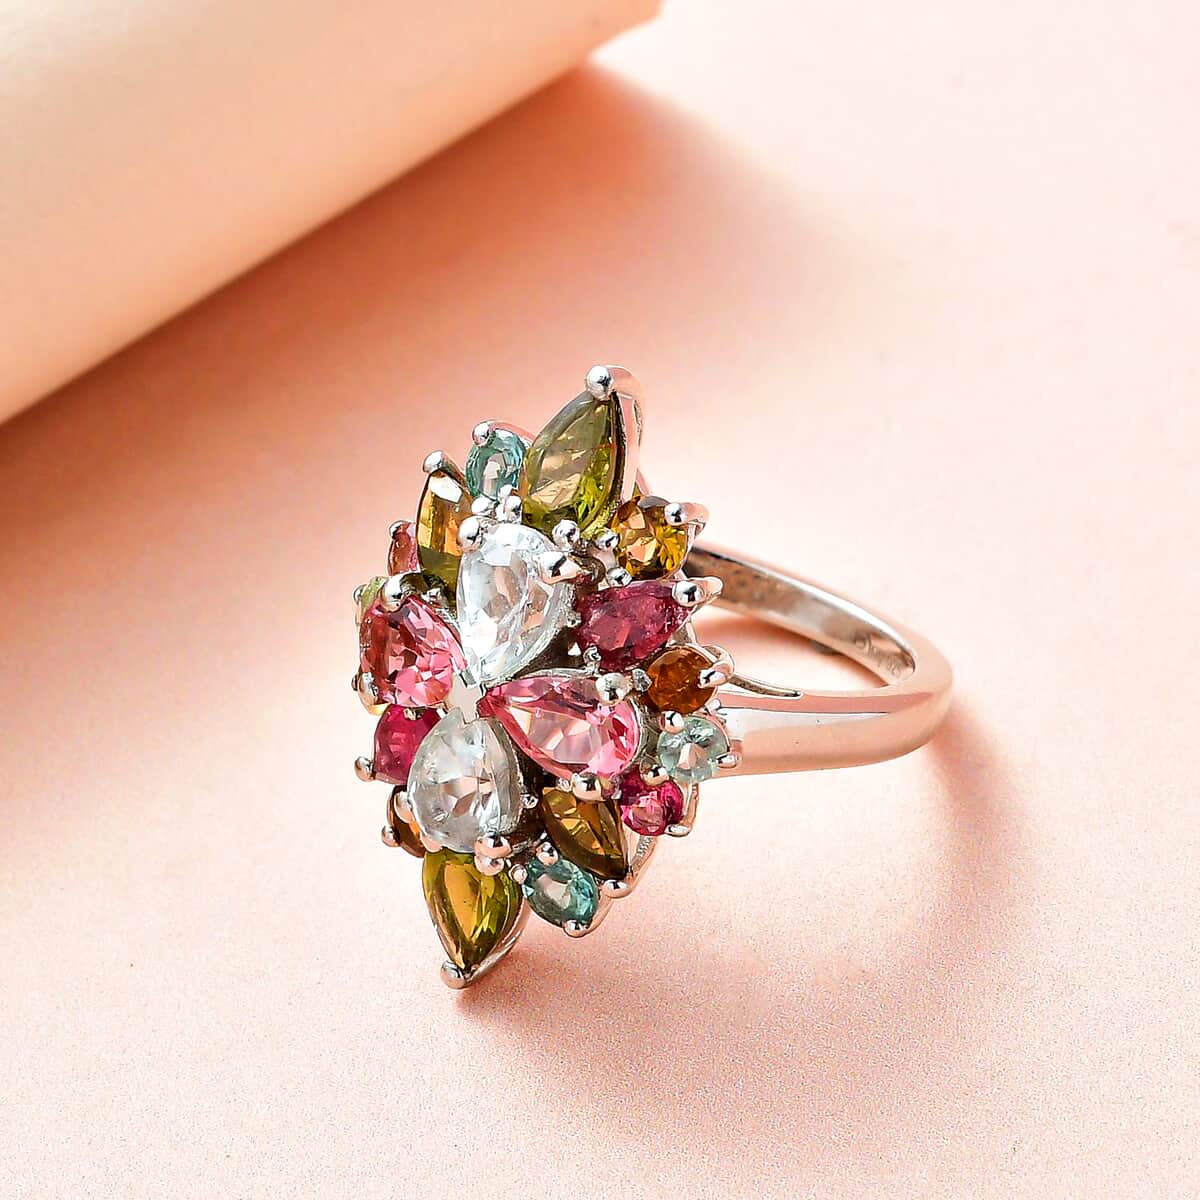 Multi-Tourmaline Elongated Ring, Multi Tourmaline Ring, Colorful Floral Ring, Elongated Floral Ring, Platinum Over Sterling Silver Ring 3.90 ctw (Size 5.0) image number 1